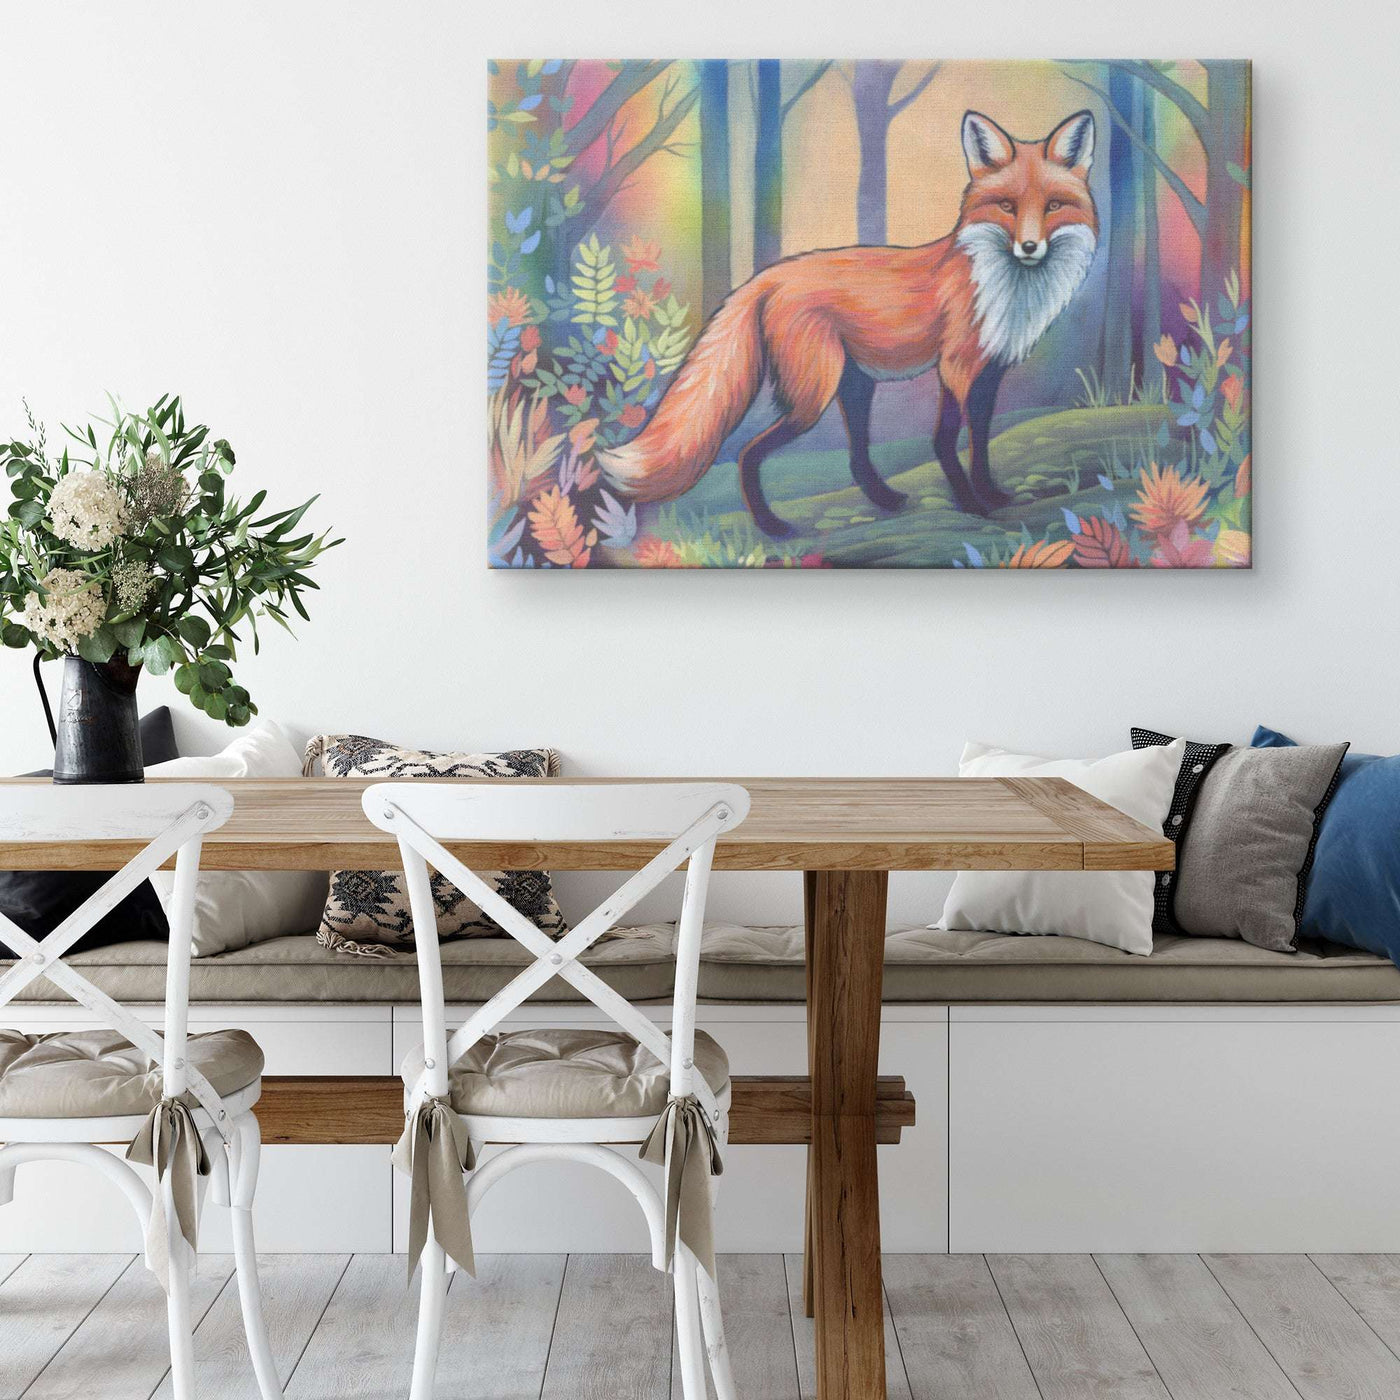 A Canvas Art Print of a fox in a colorful forest hangs above a wooden table in a modern living room with white chairs and a sofa.